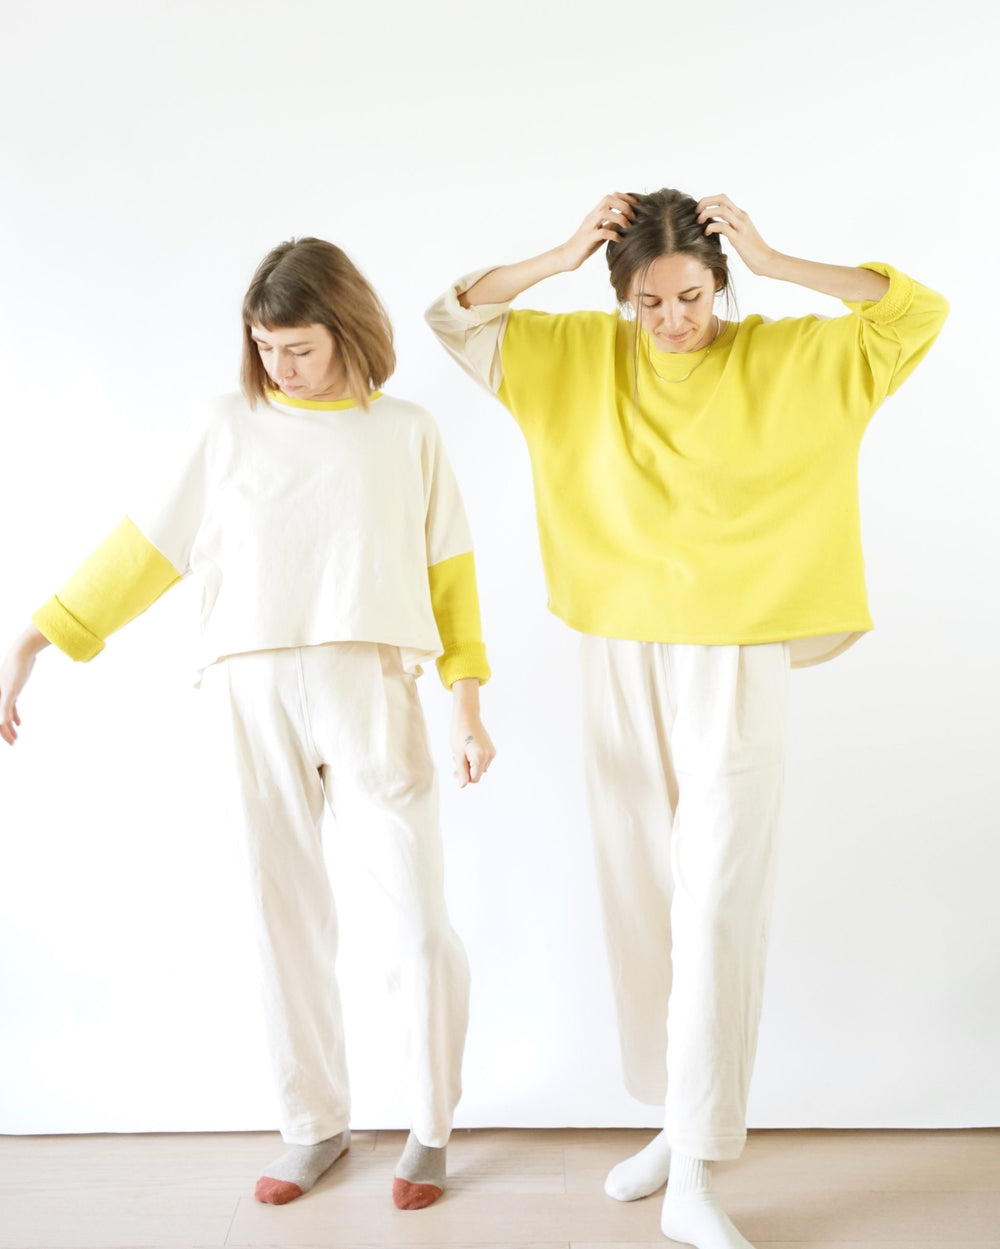 Women wearing the All Around Crew sewing pattern from Matchy Matchy Sewing Club on The Fold Line. A top pattern made in french terry, sweatshirt fleece, and jersey fabrics, featuring a cropped or tunic length, wide relaxed fit, dropped shoulders, gently c